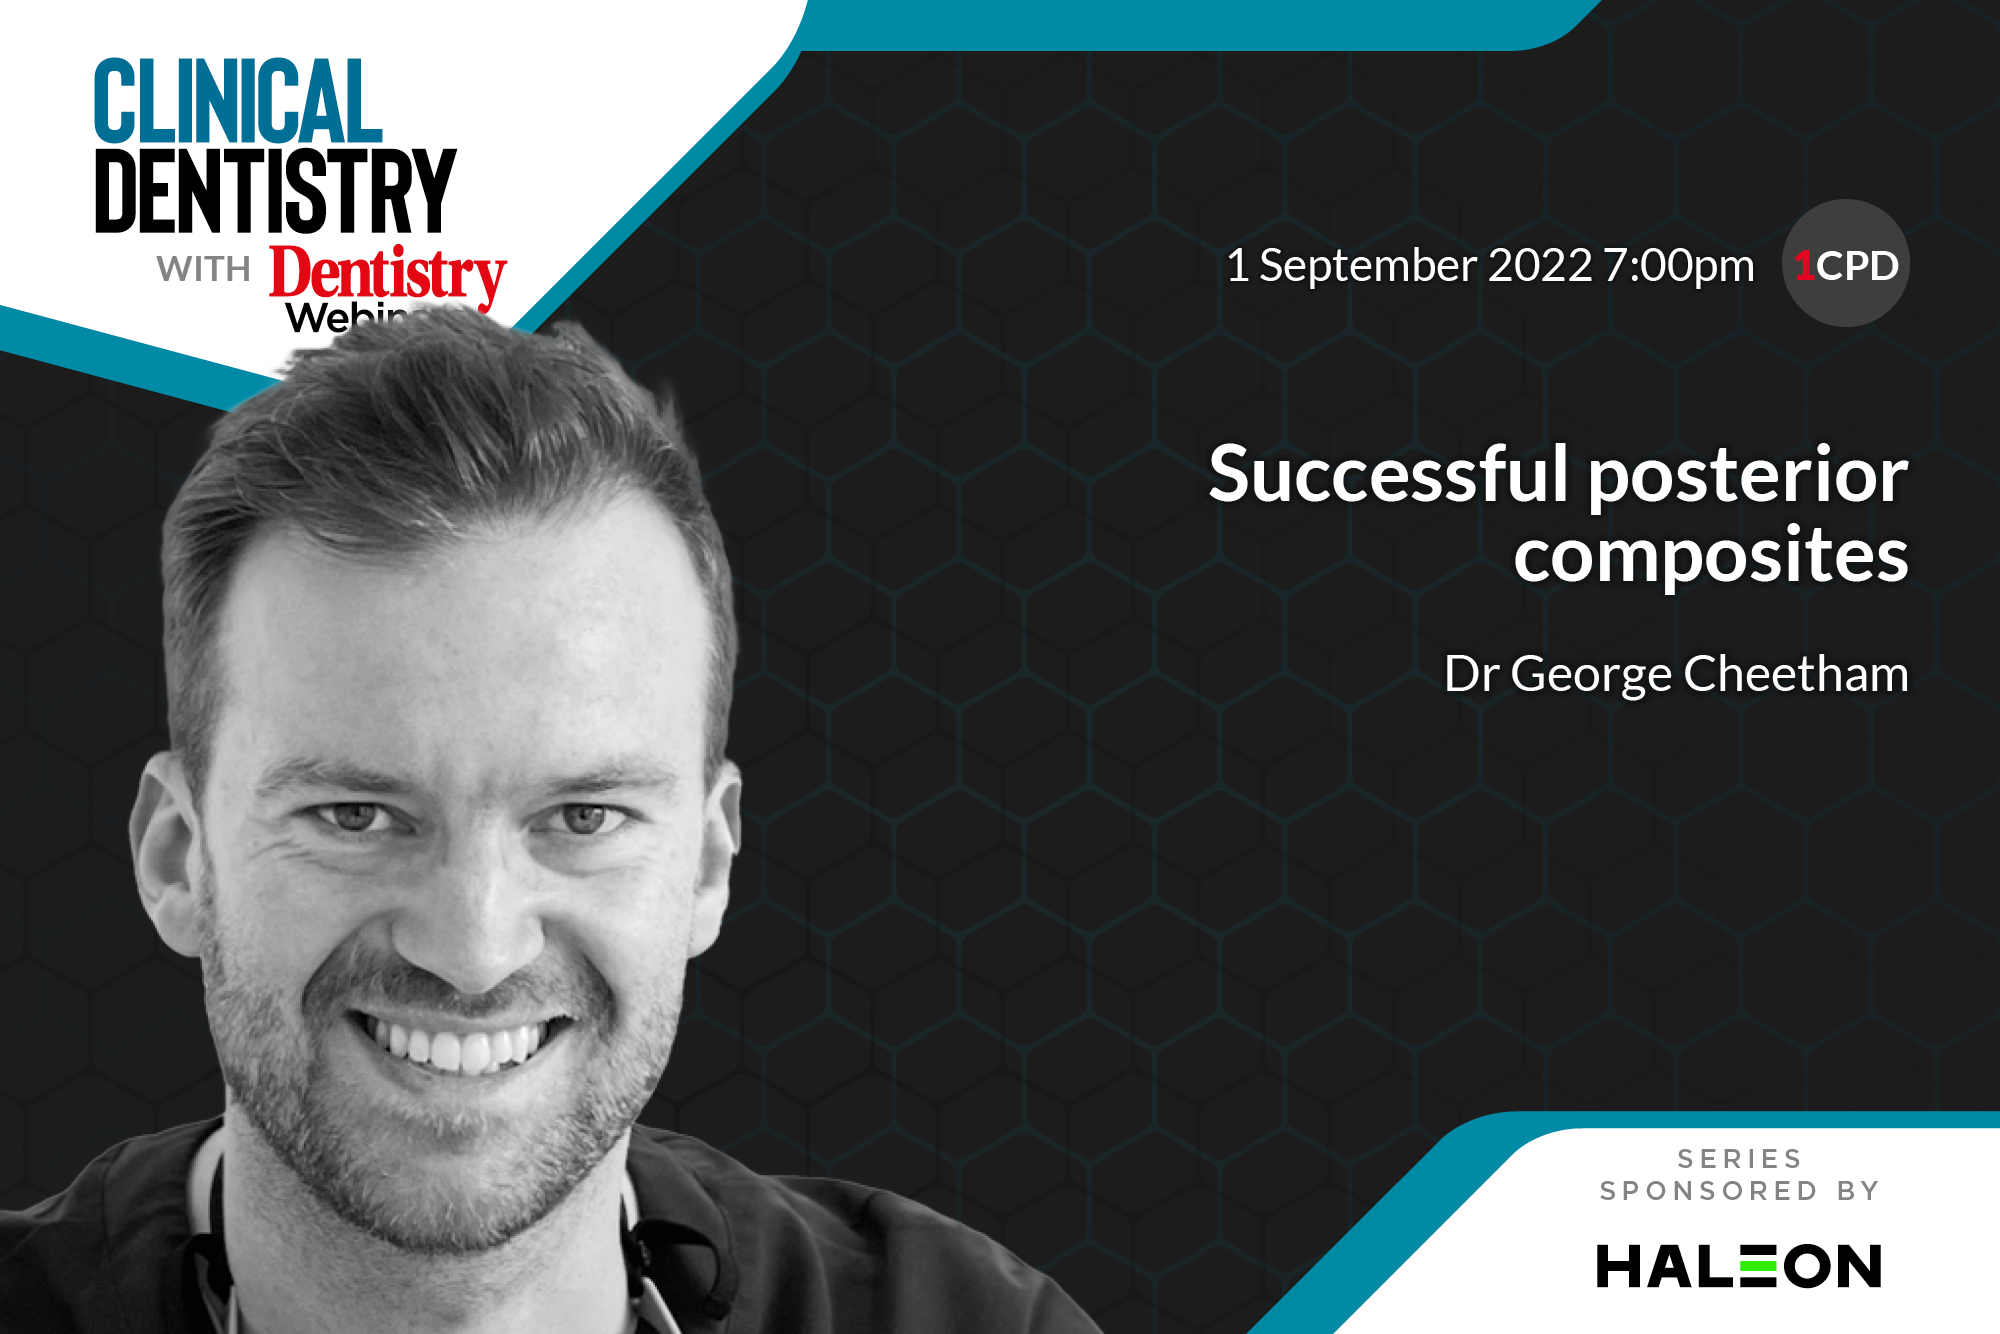 Join Dr George Cheetham on 1 September at 7pm as he discusses successful posterior composites – sign up now!